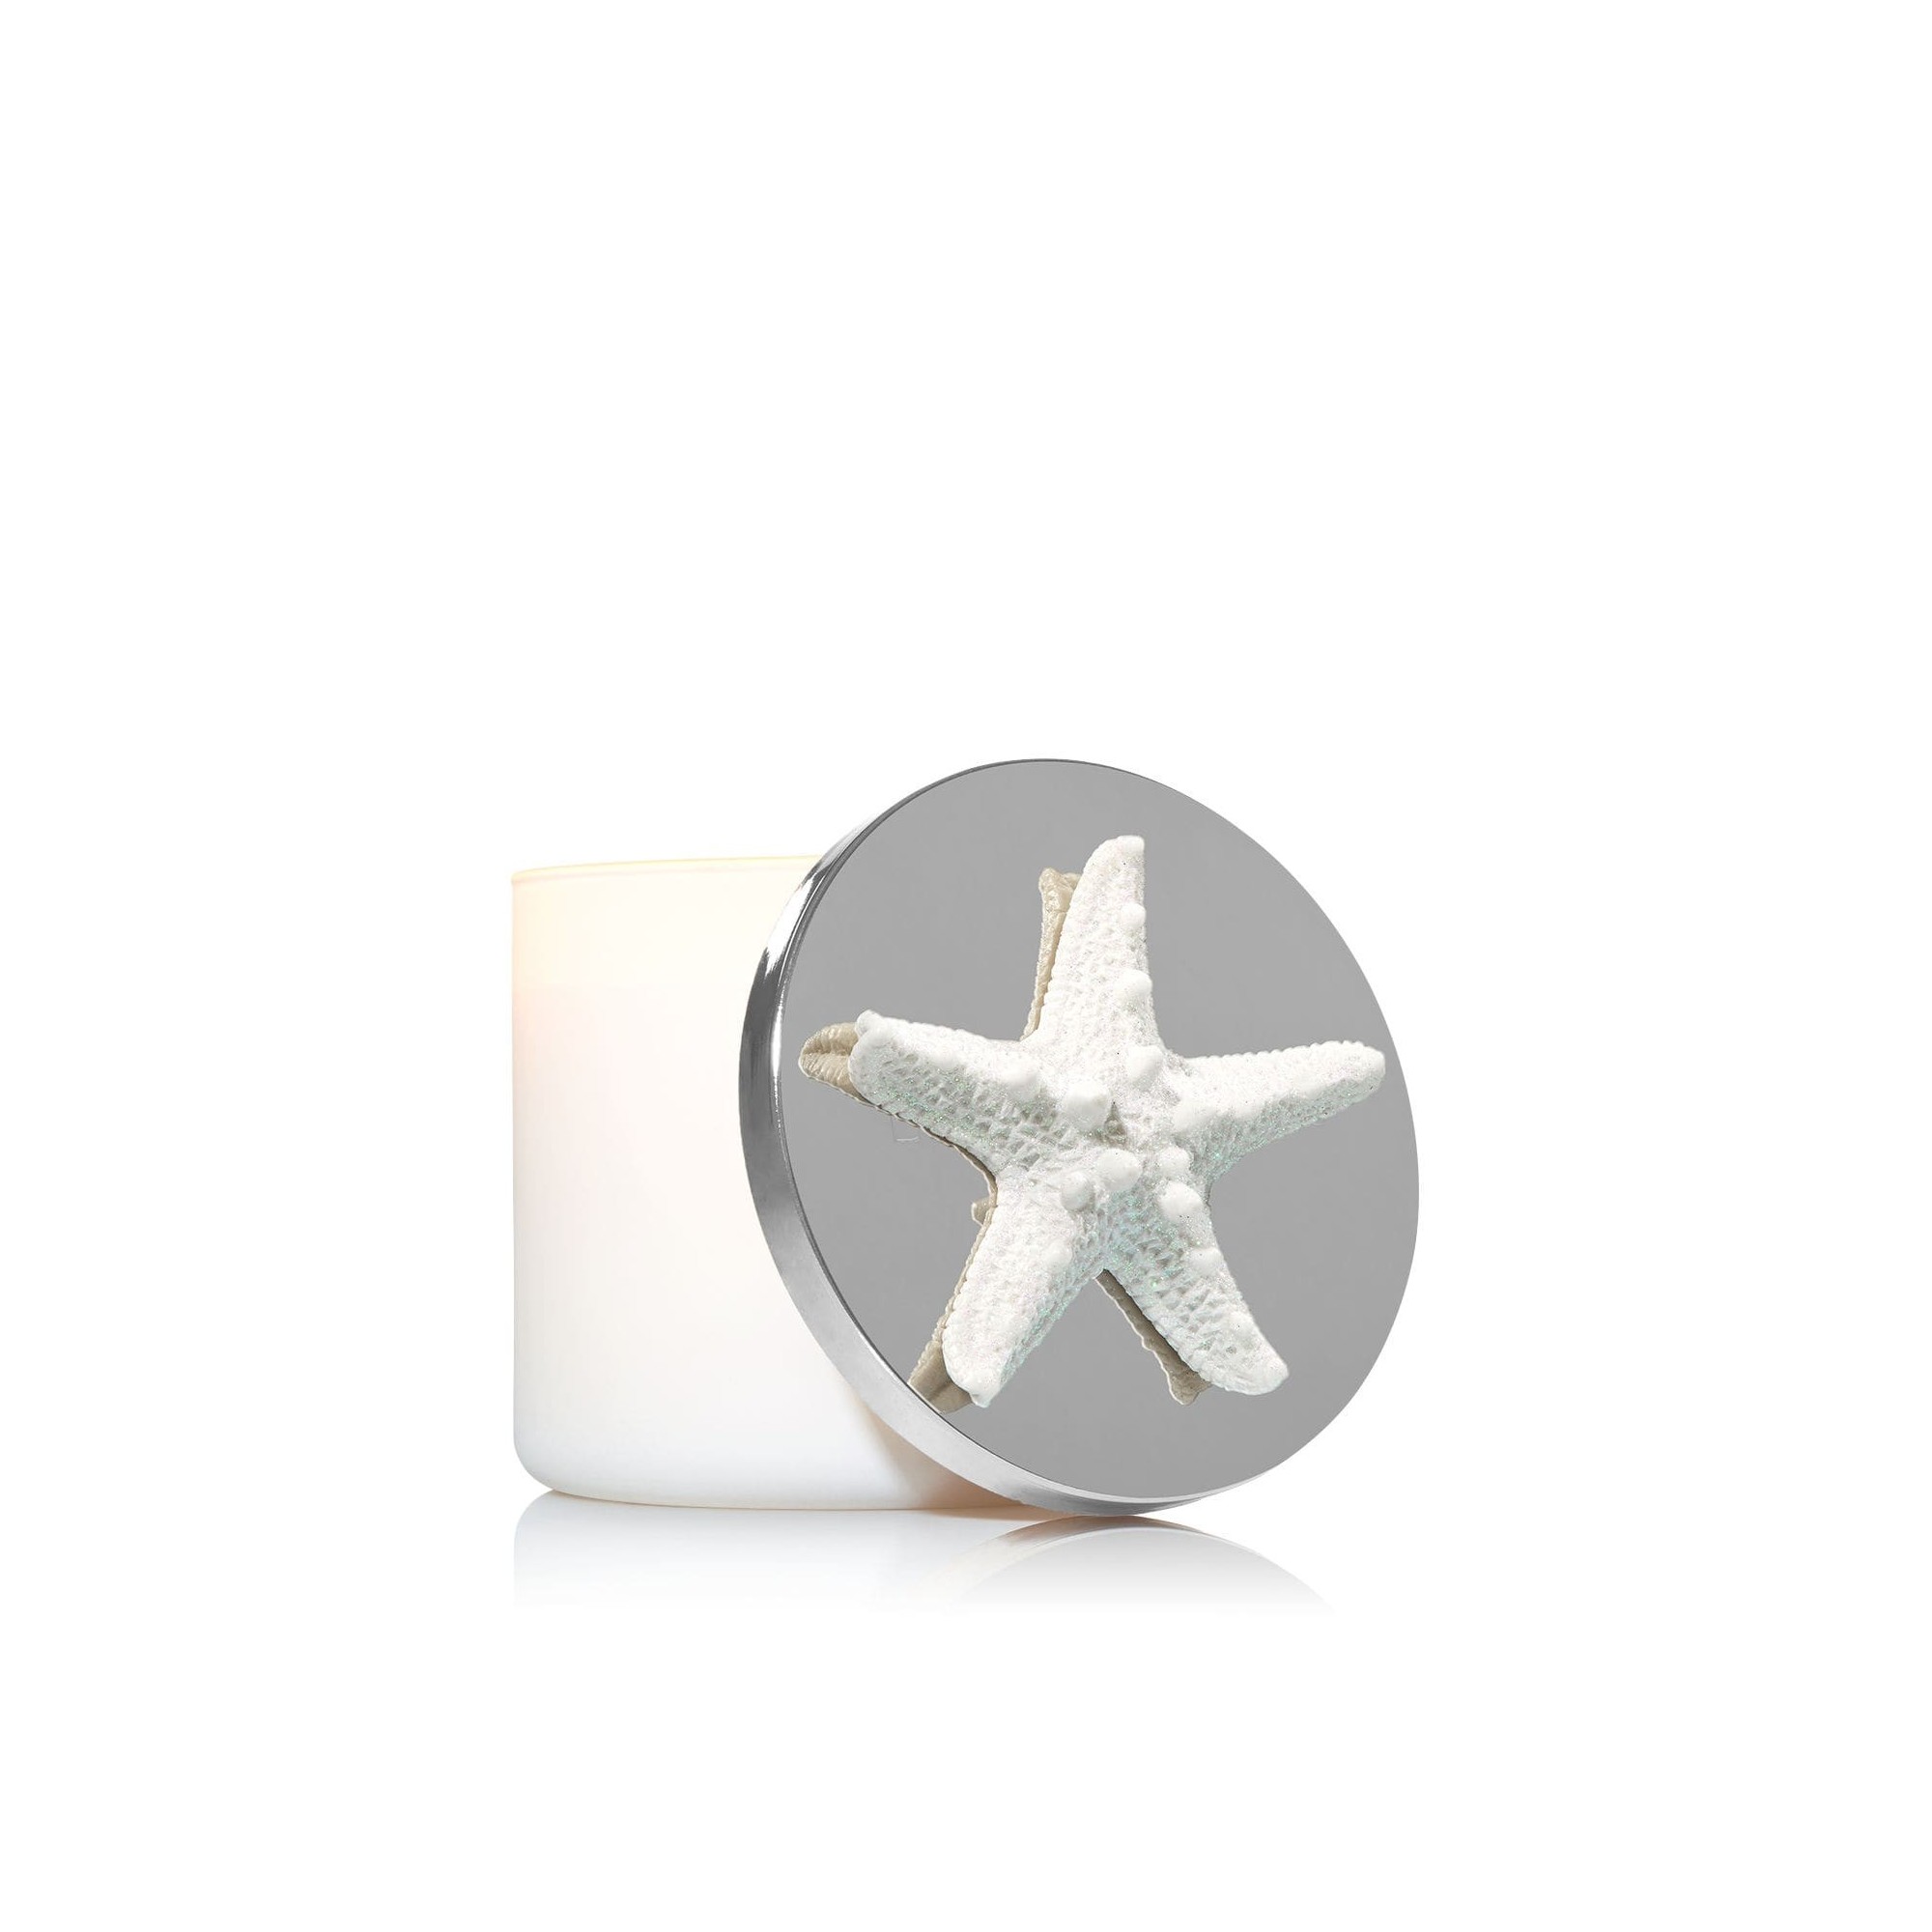 Bath & Body Works Sparkly White Starfish 3-Wick Candle Magnet